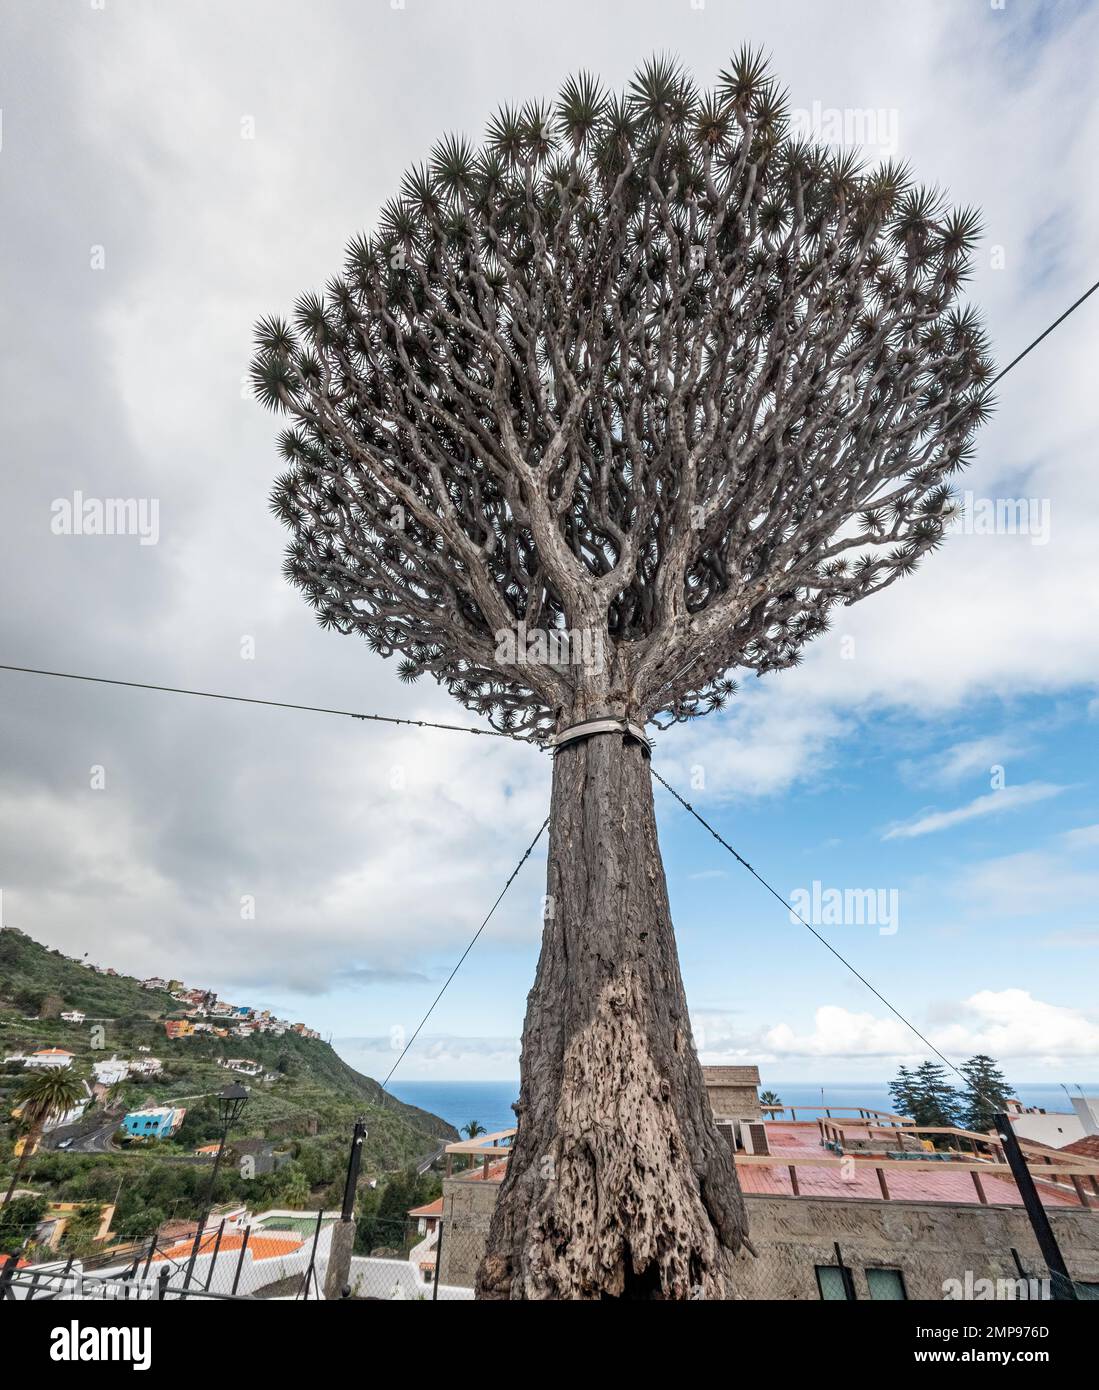 Tenerife's Iconic Tree Struggling to Stay Standing Stock Photo